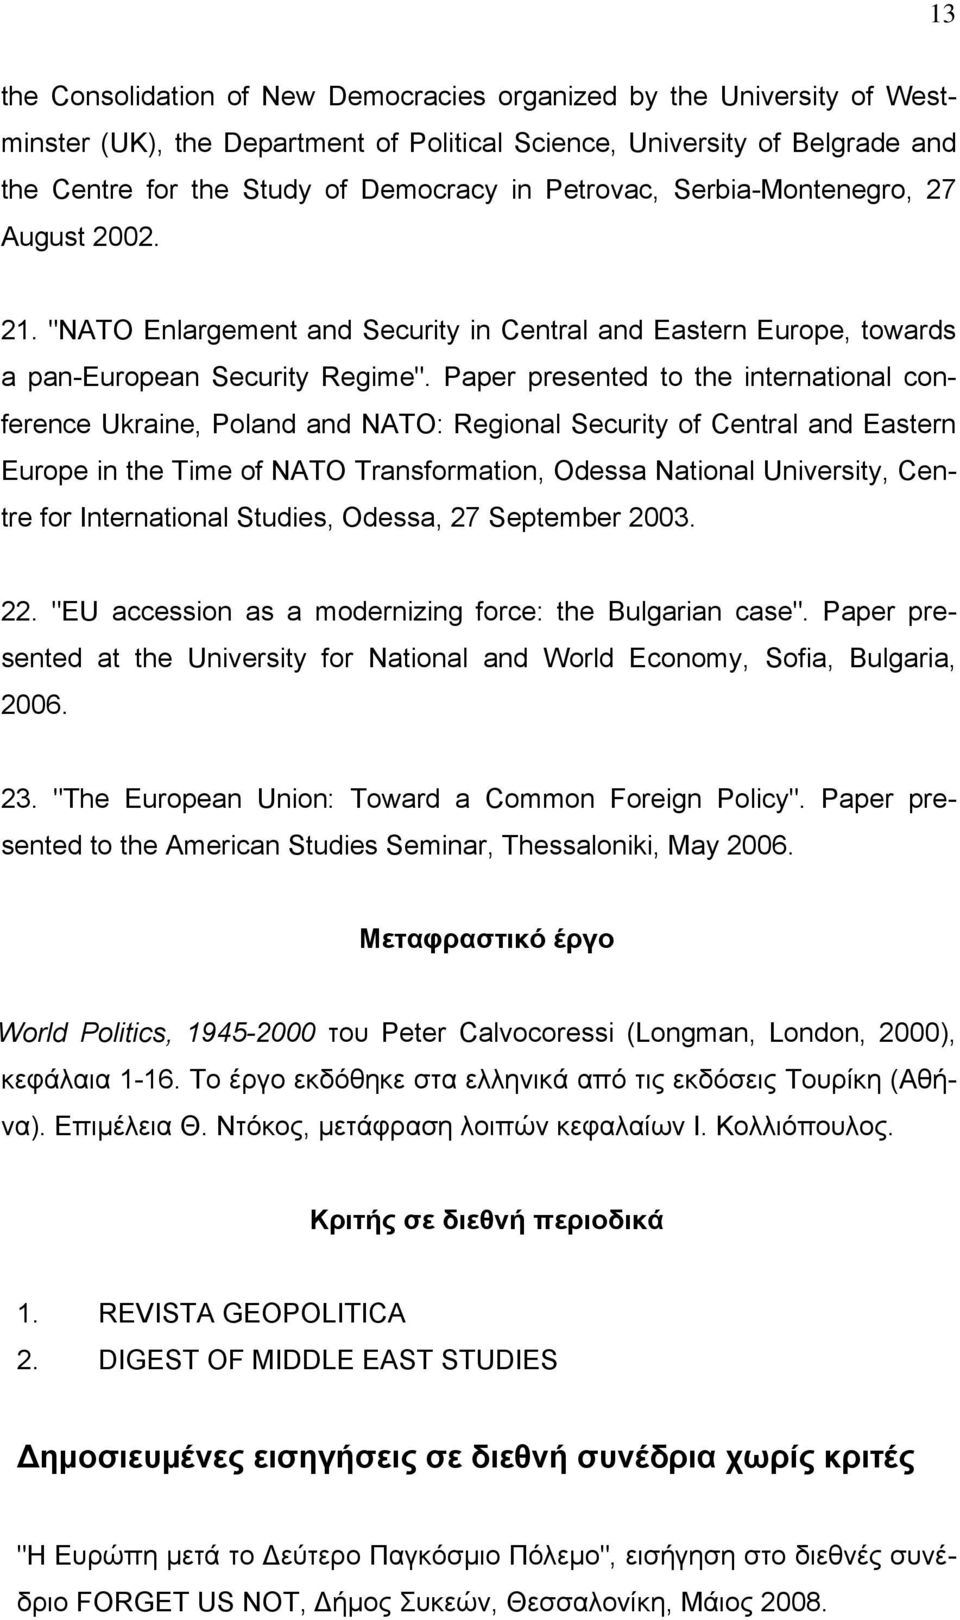 Paper presented to the international conference Ukraine, Poland and NATO: Regional Security of Central and Eastern Europe in the Time of NATO Transformation, Odessa National University, Centre for